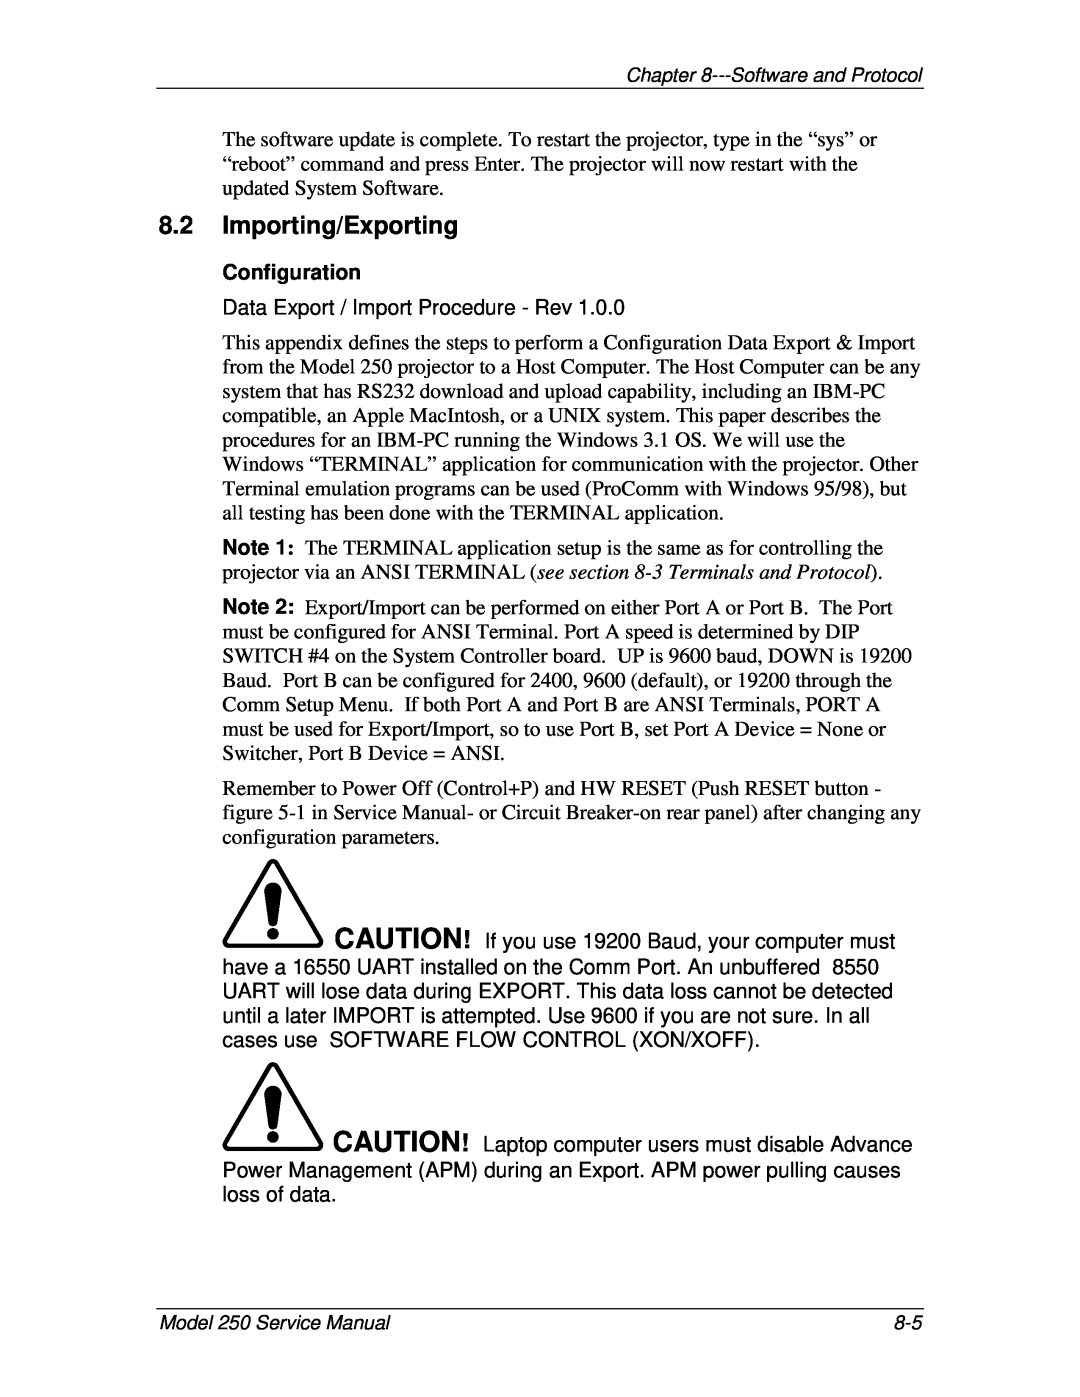 JVC 250 service manual Importing/Exporting, Configuration 